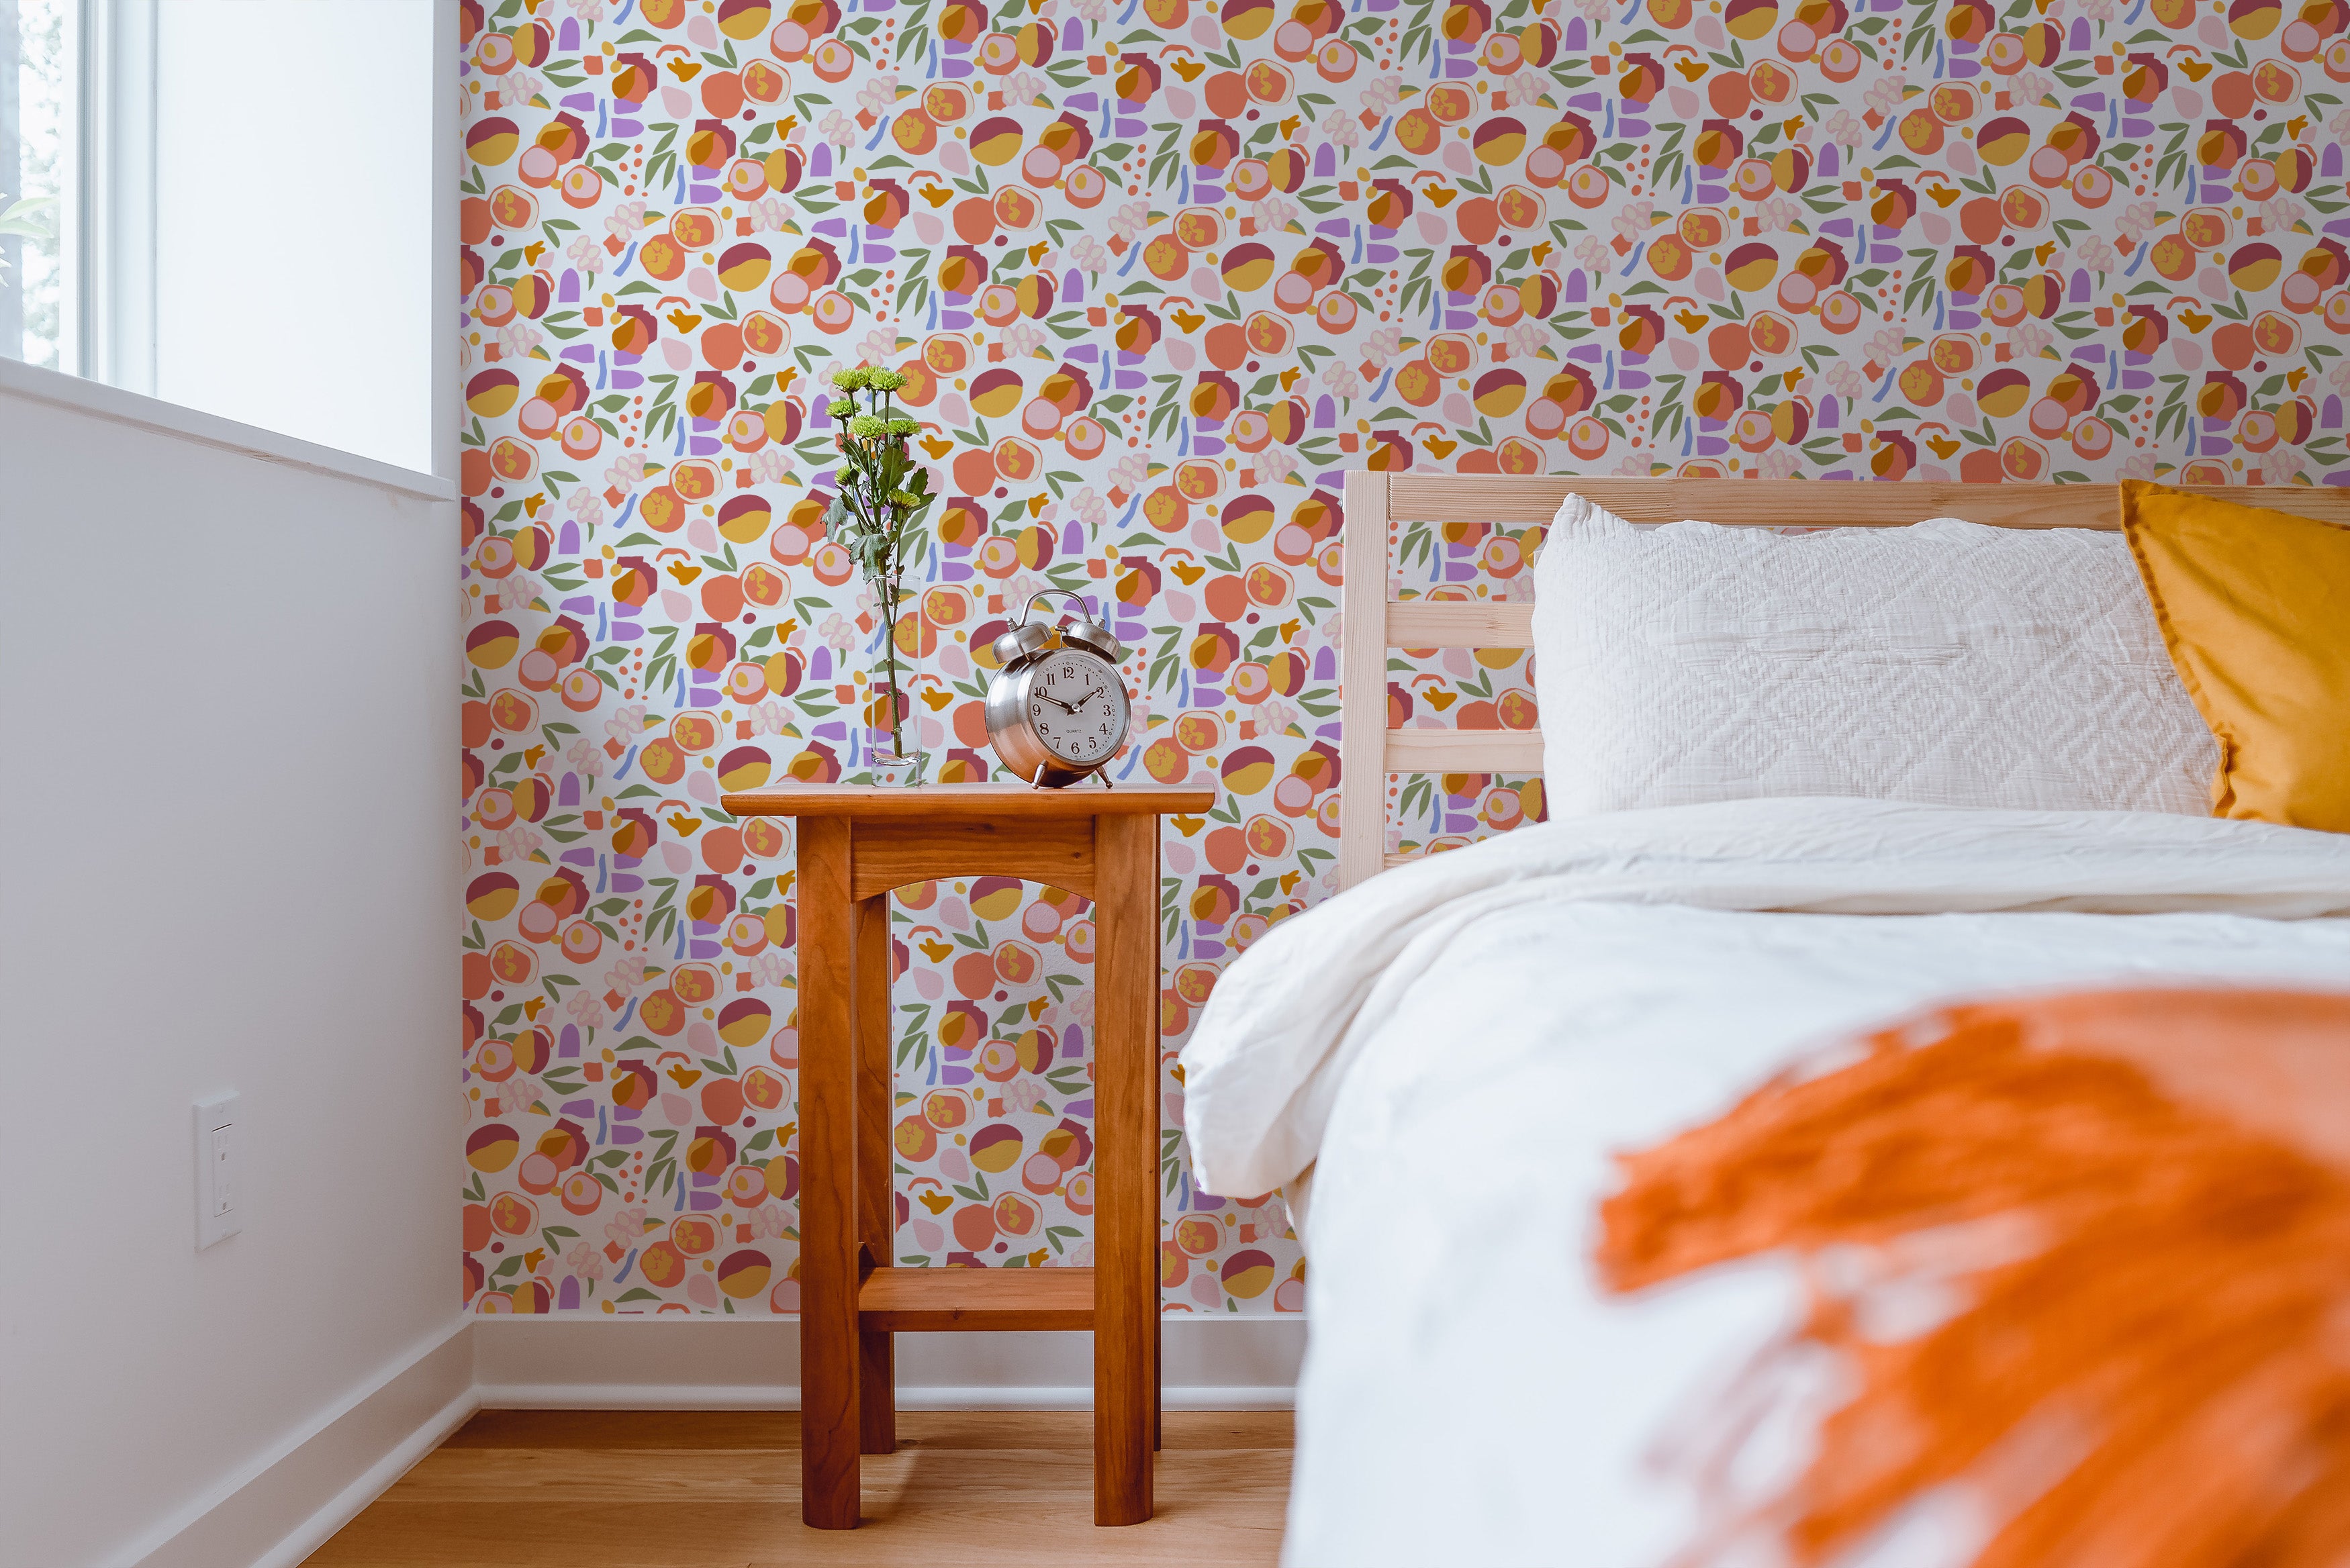 A bedroom scene showcasing the Funky Fruit Wallpaper with a vibrant array of fruit illustrations and floral elements on the walls. A white bed with orange and yellow pillows complements the lively wallpaper, enhancing a modern and youthful atmosphere in the room.